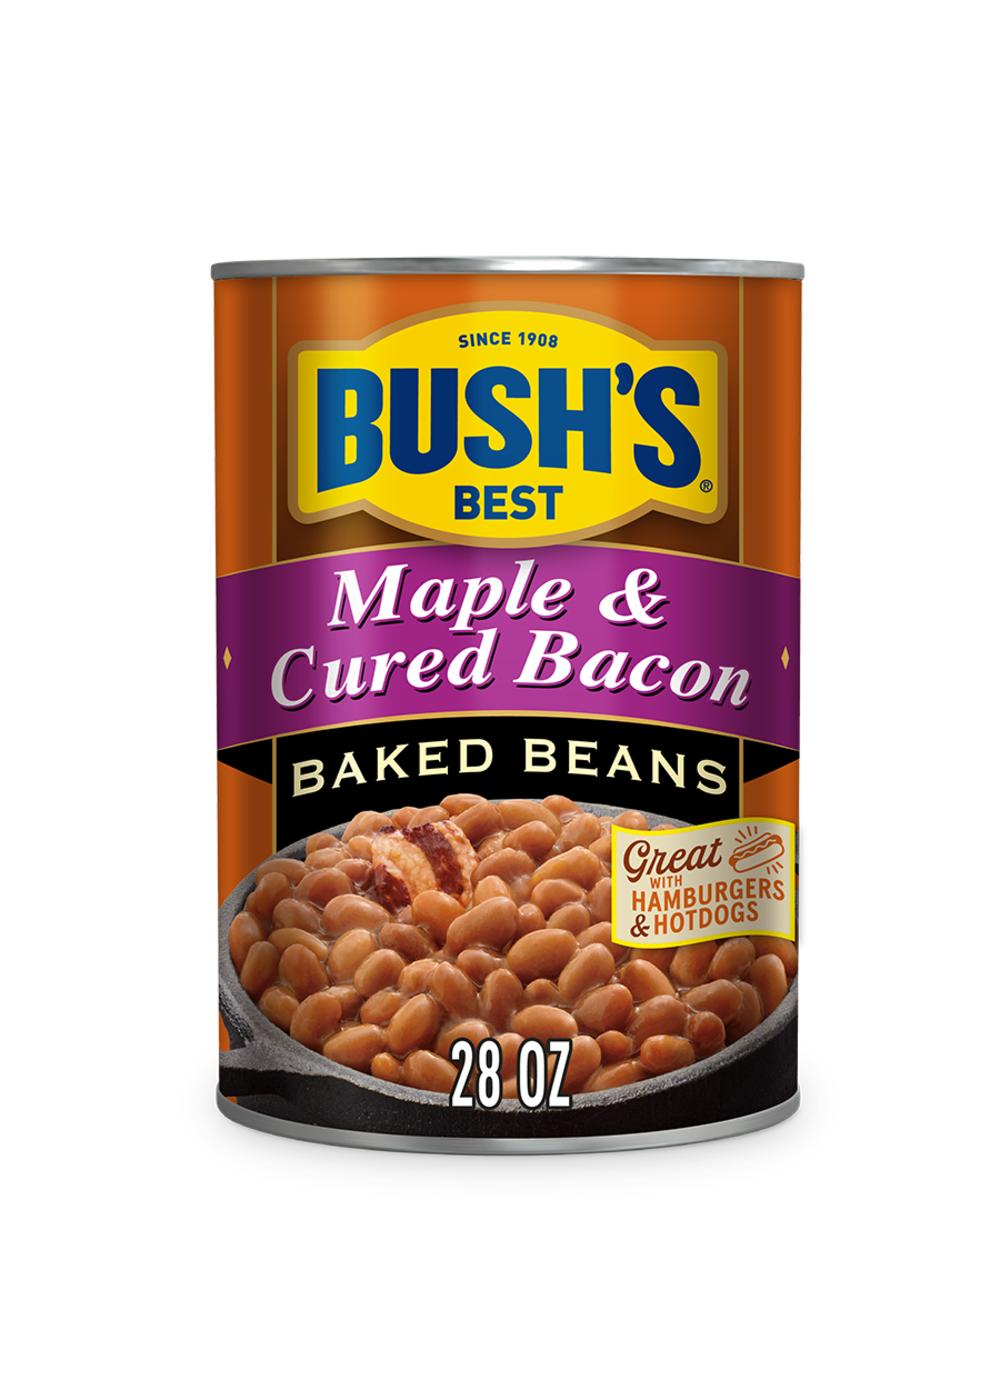 Bush's Best Maple Cured Bacon Baked Beans; image 1 of 3